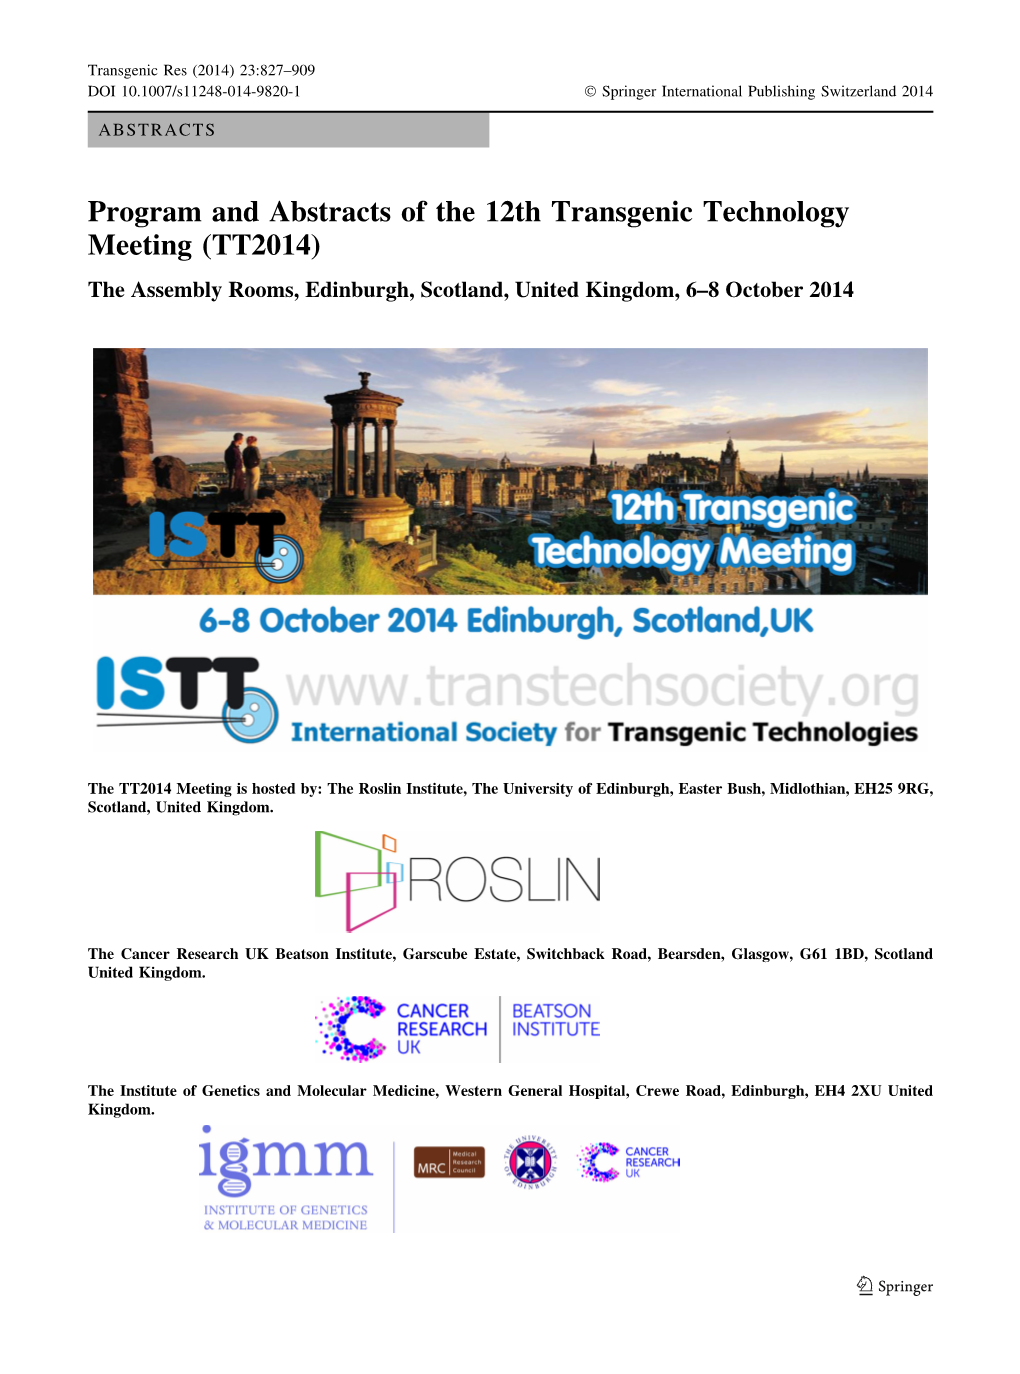 Program and Abstracts of the 12Th Transgenic Technology Meeting (TT2014) the Assembly Rooms, Edinburgh, Scotland, United Kingdom, 6–8 October 2014